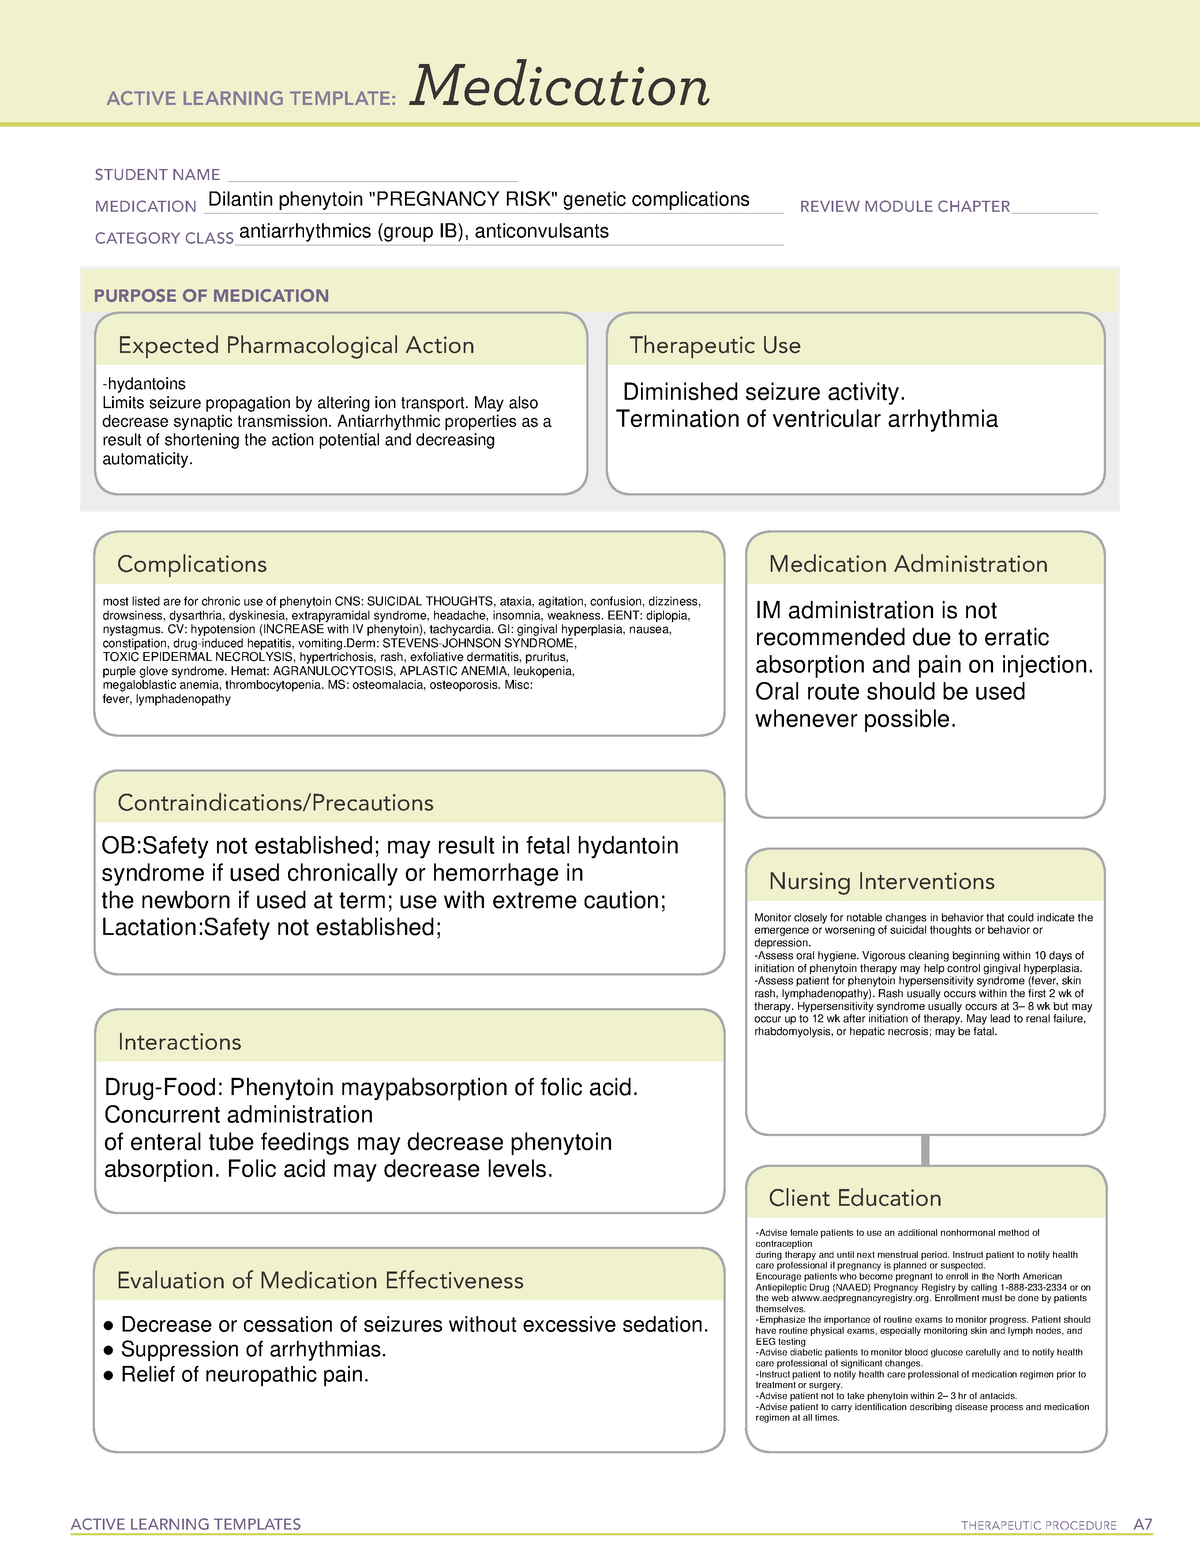 active-learning-template-medication-phenytoin-preg-risk-active